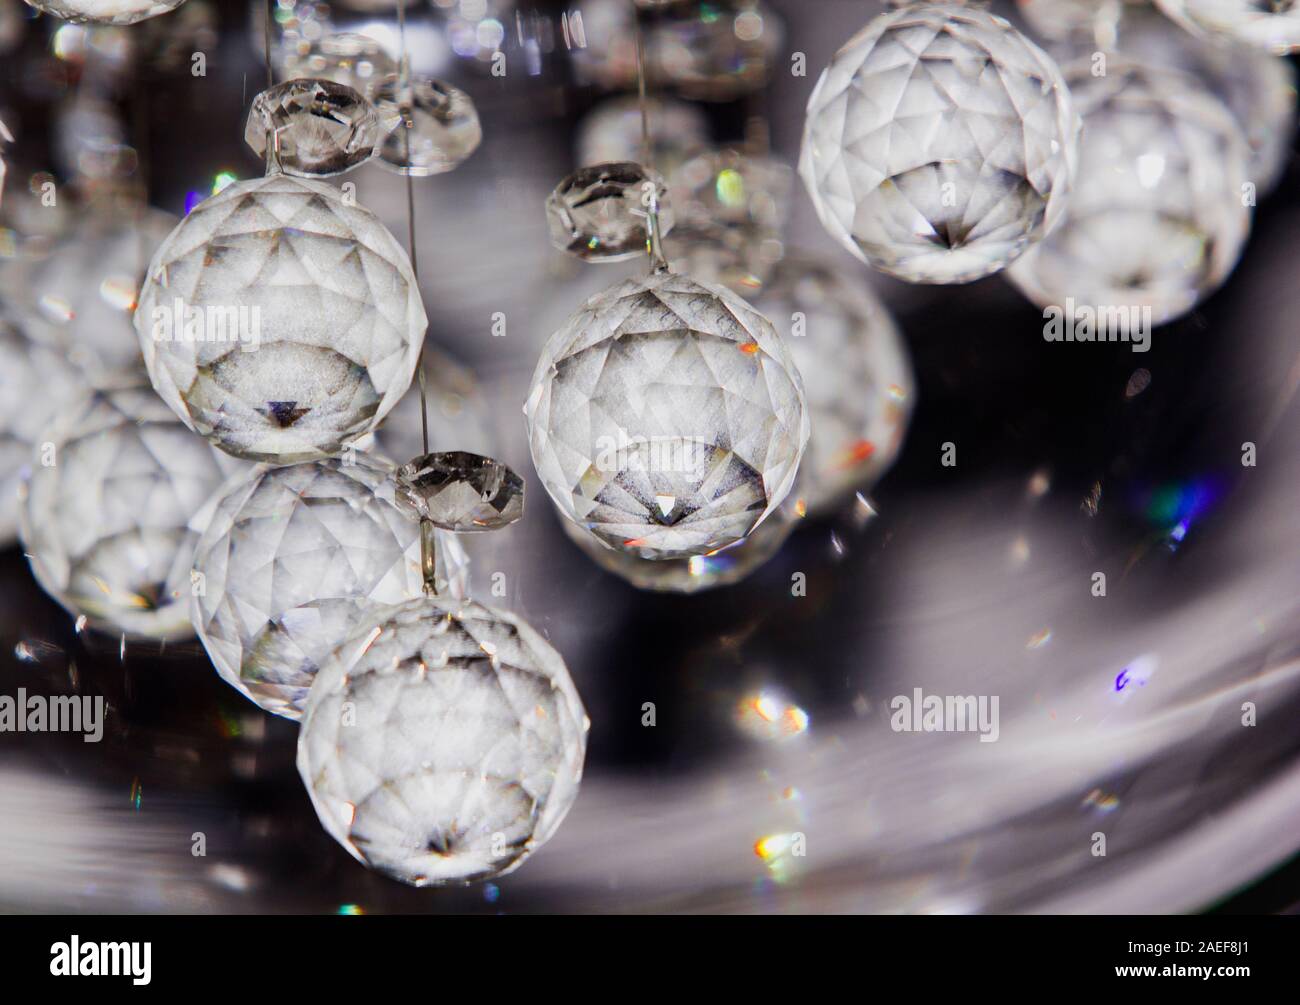 Close Up Of Opaque Crystal Balls Hanging From The Ceiling